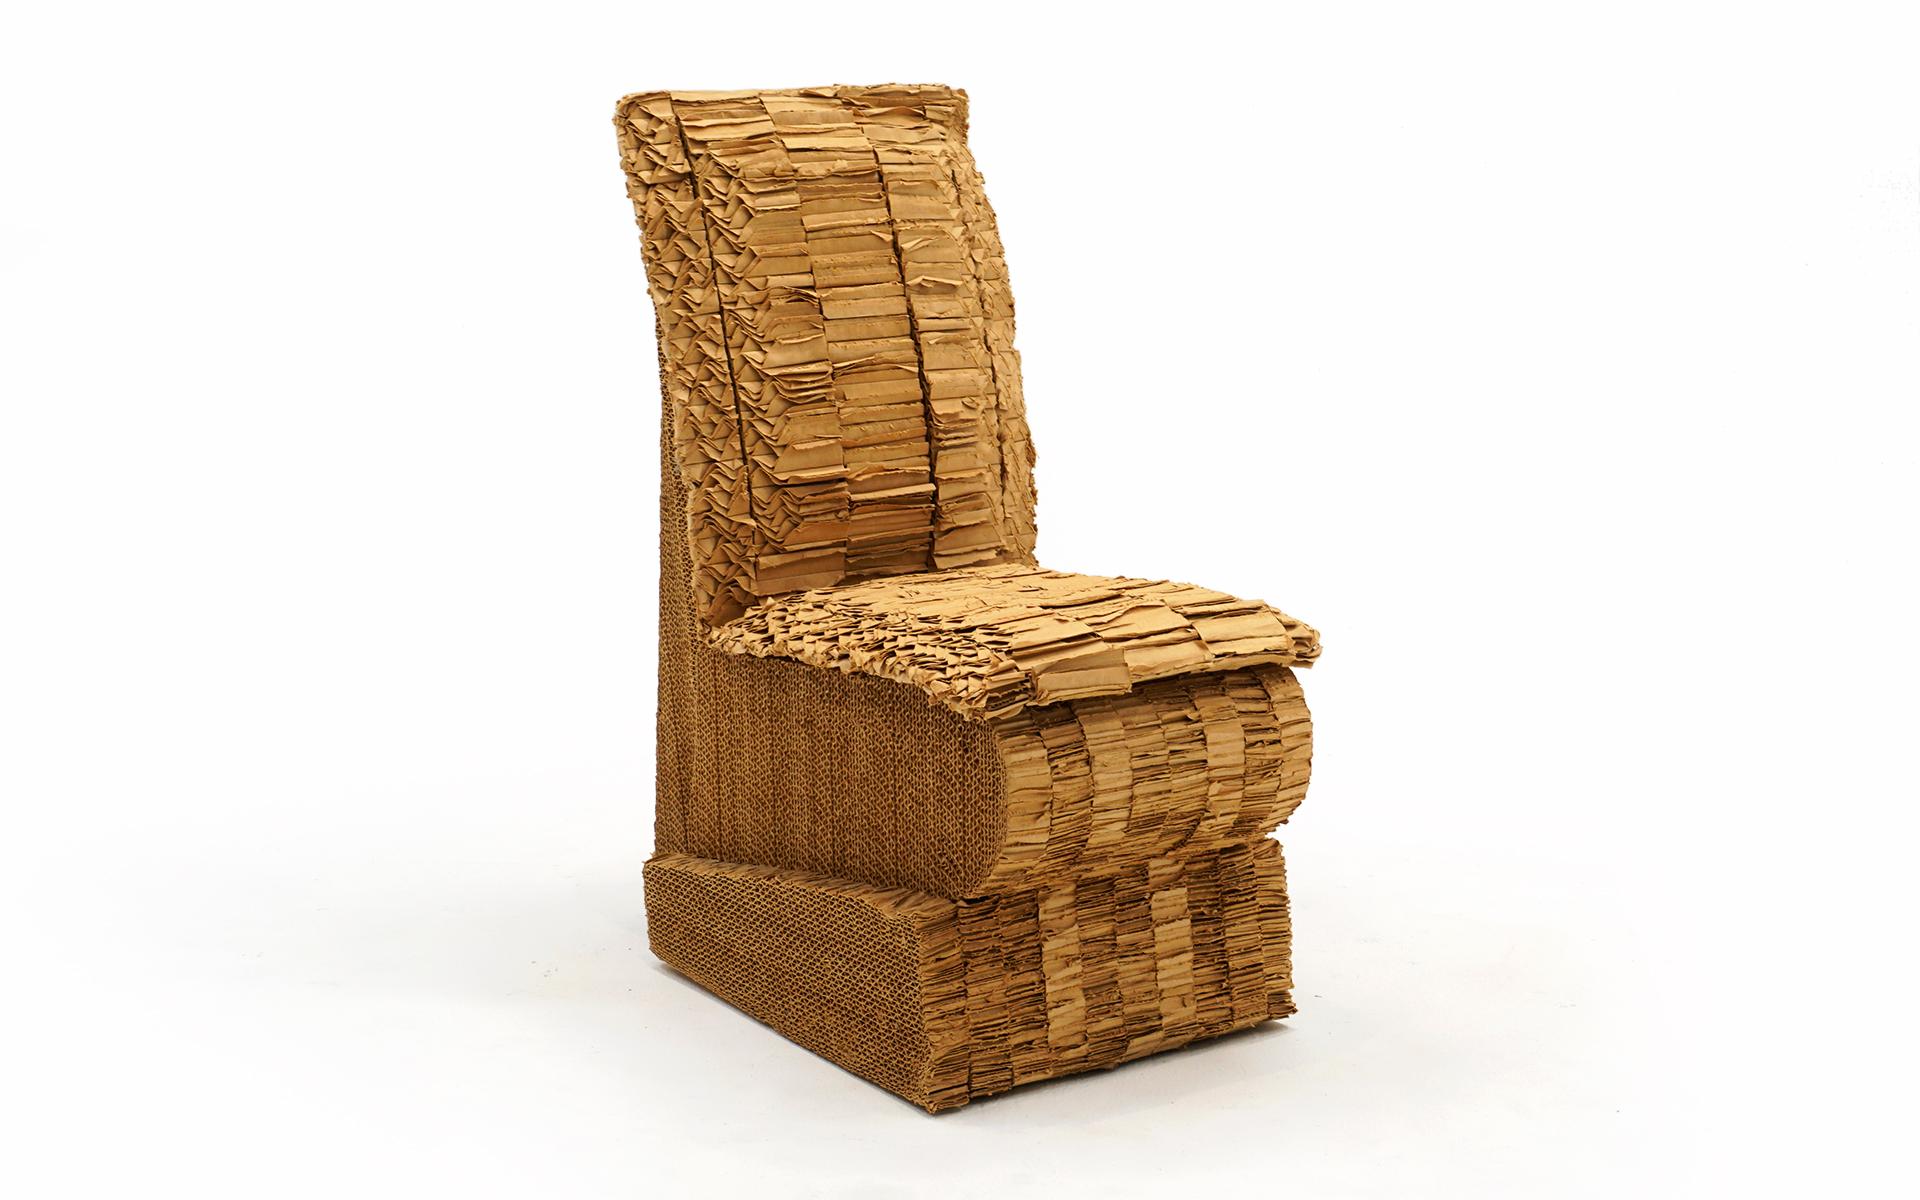 Post-Modern Sitting Beaver Chair by Frank Gehry for New City Editions, 1979 / 1986 For Sale